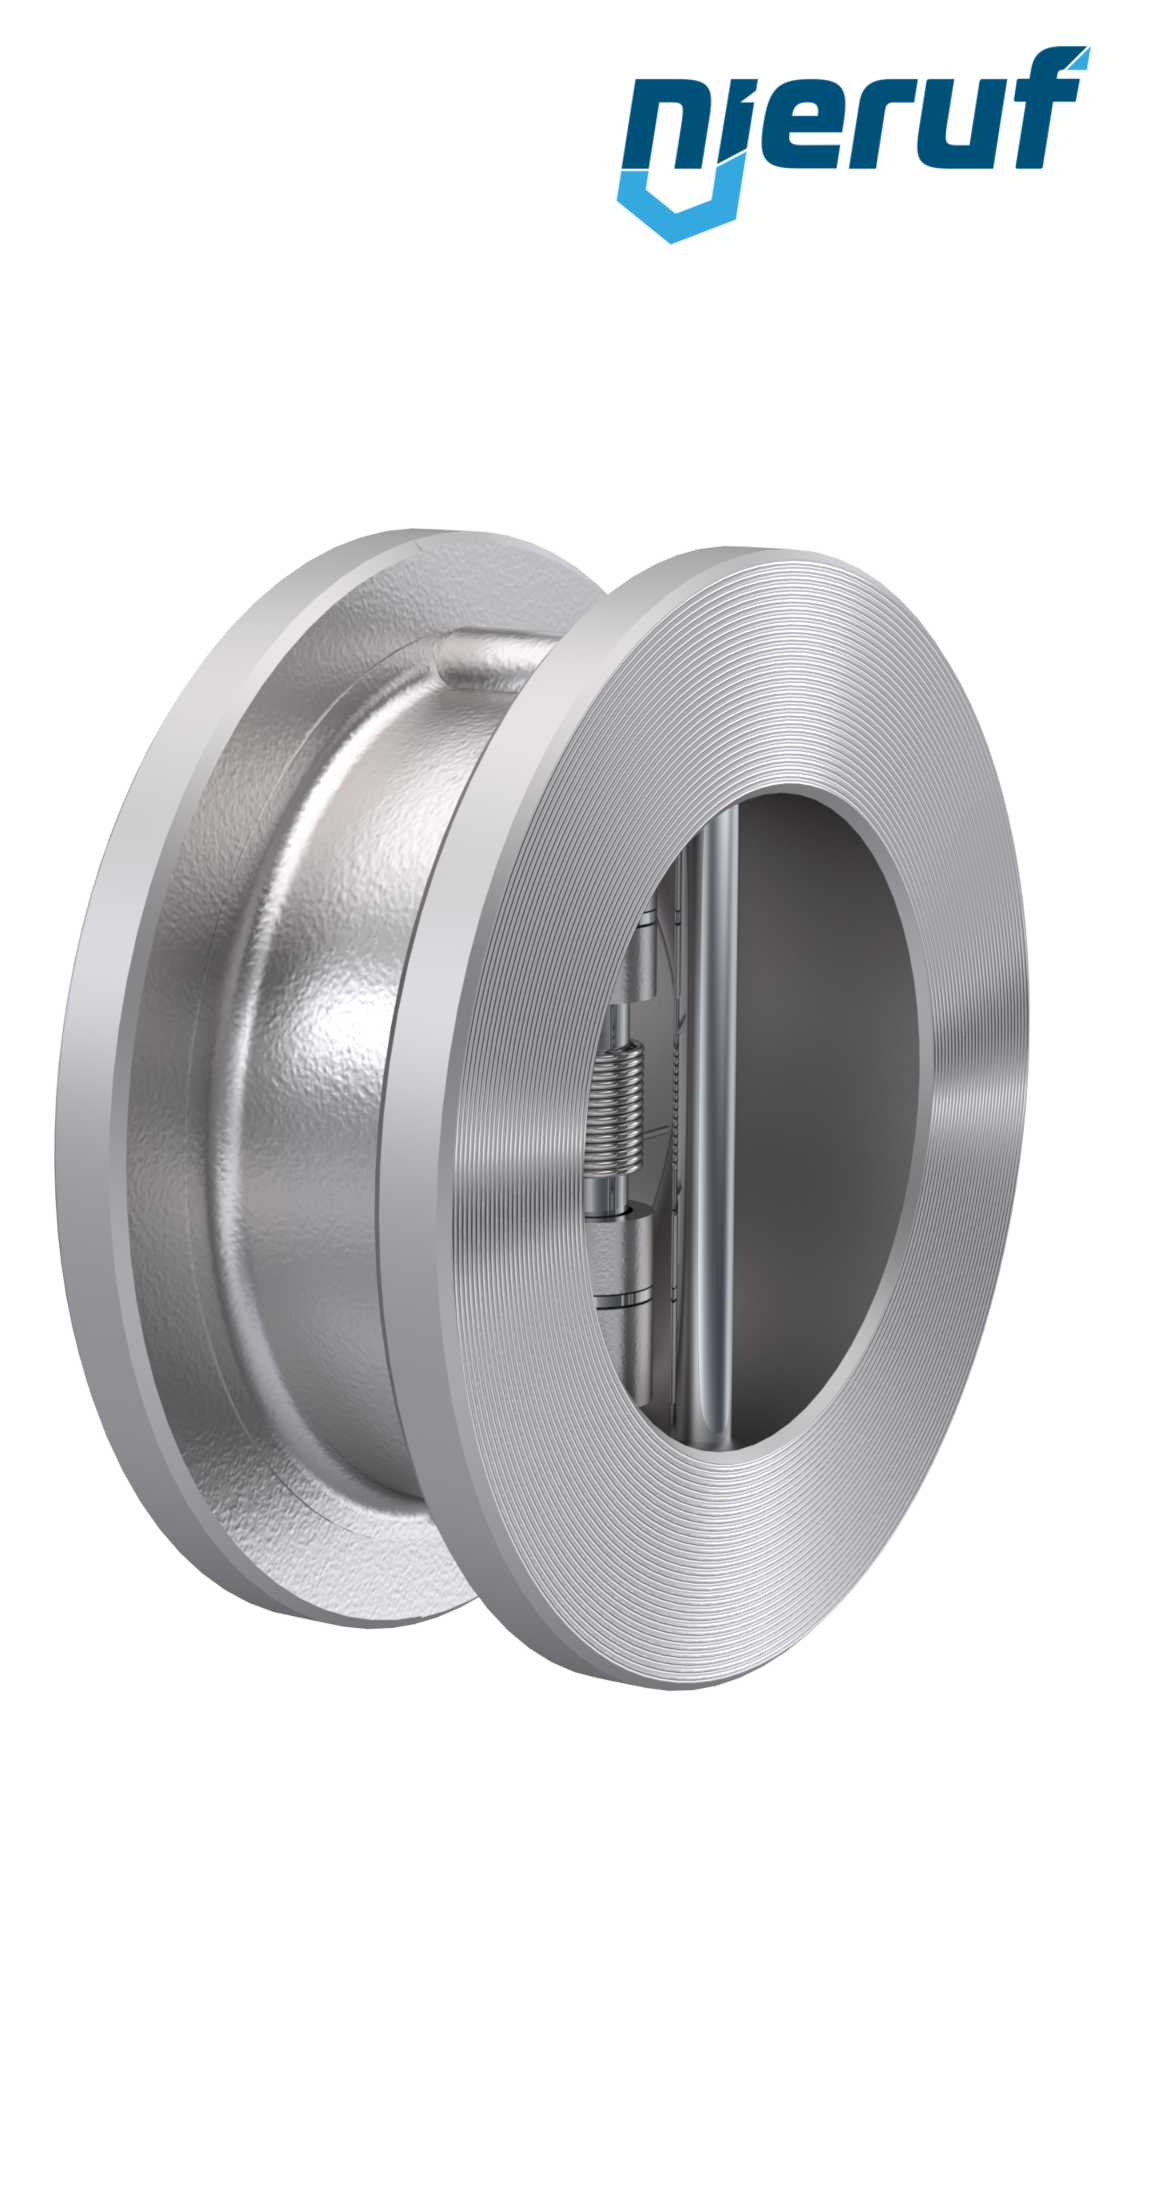 dual plate check valve DN350 DR03 stainless steel 1.4408 metal